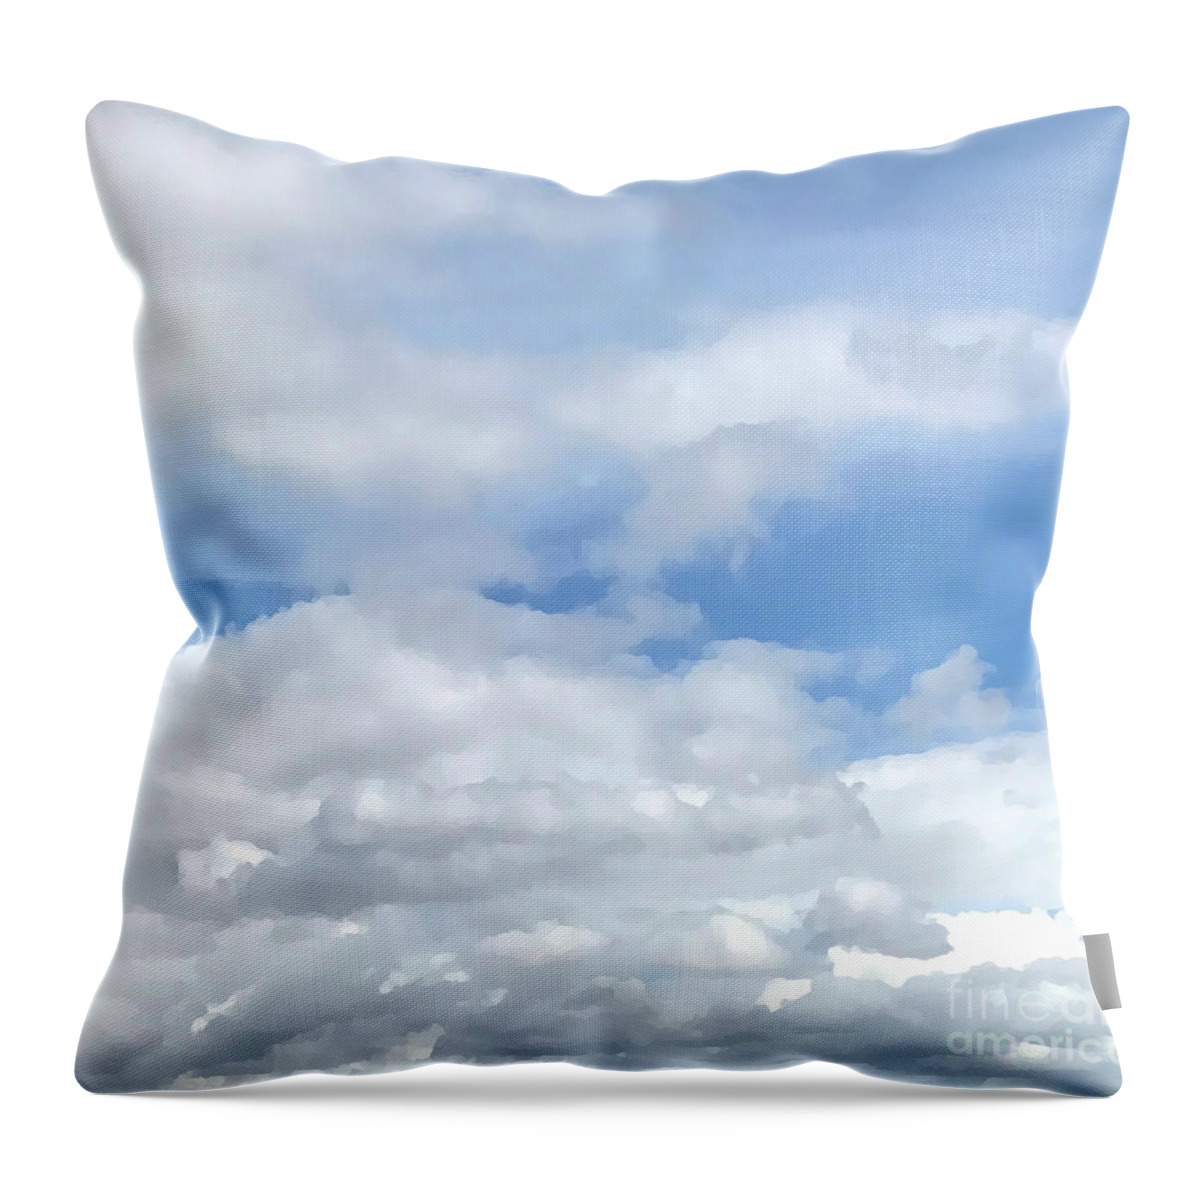 Day Throw Pillow featuring the digital art Soft Heavenly Clouds by Judy Palkimas